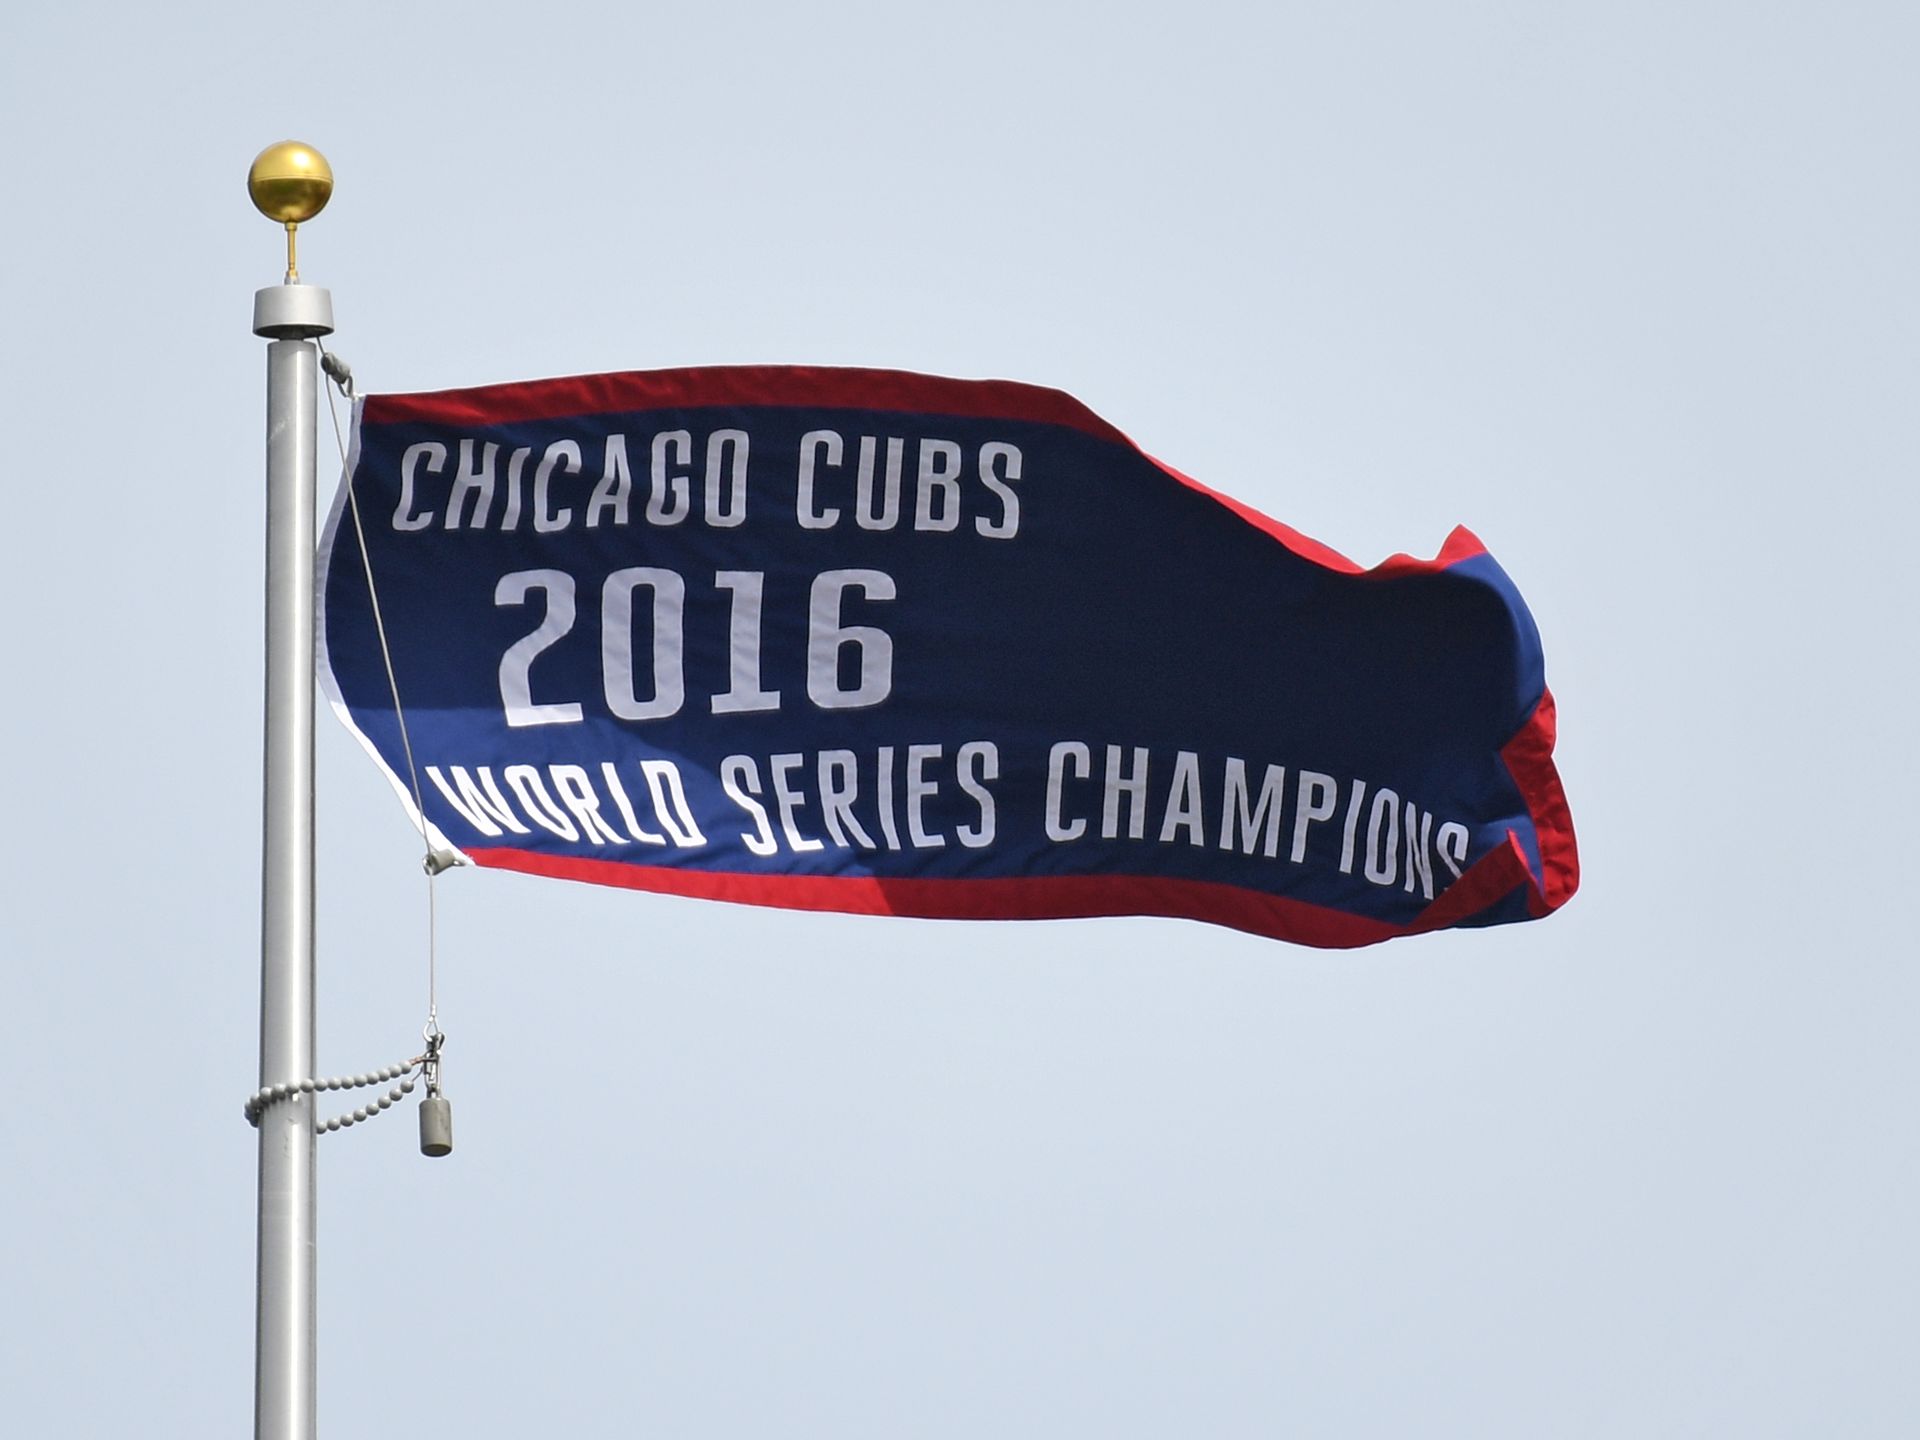 Thank you, Chicago Cubs world series 2016 - Chicago Cubs baseball team